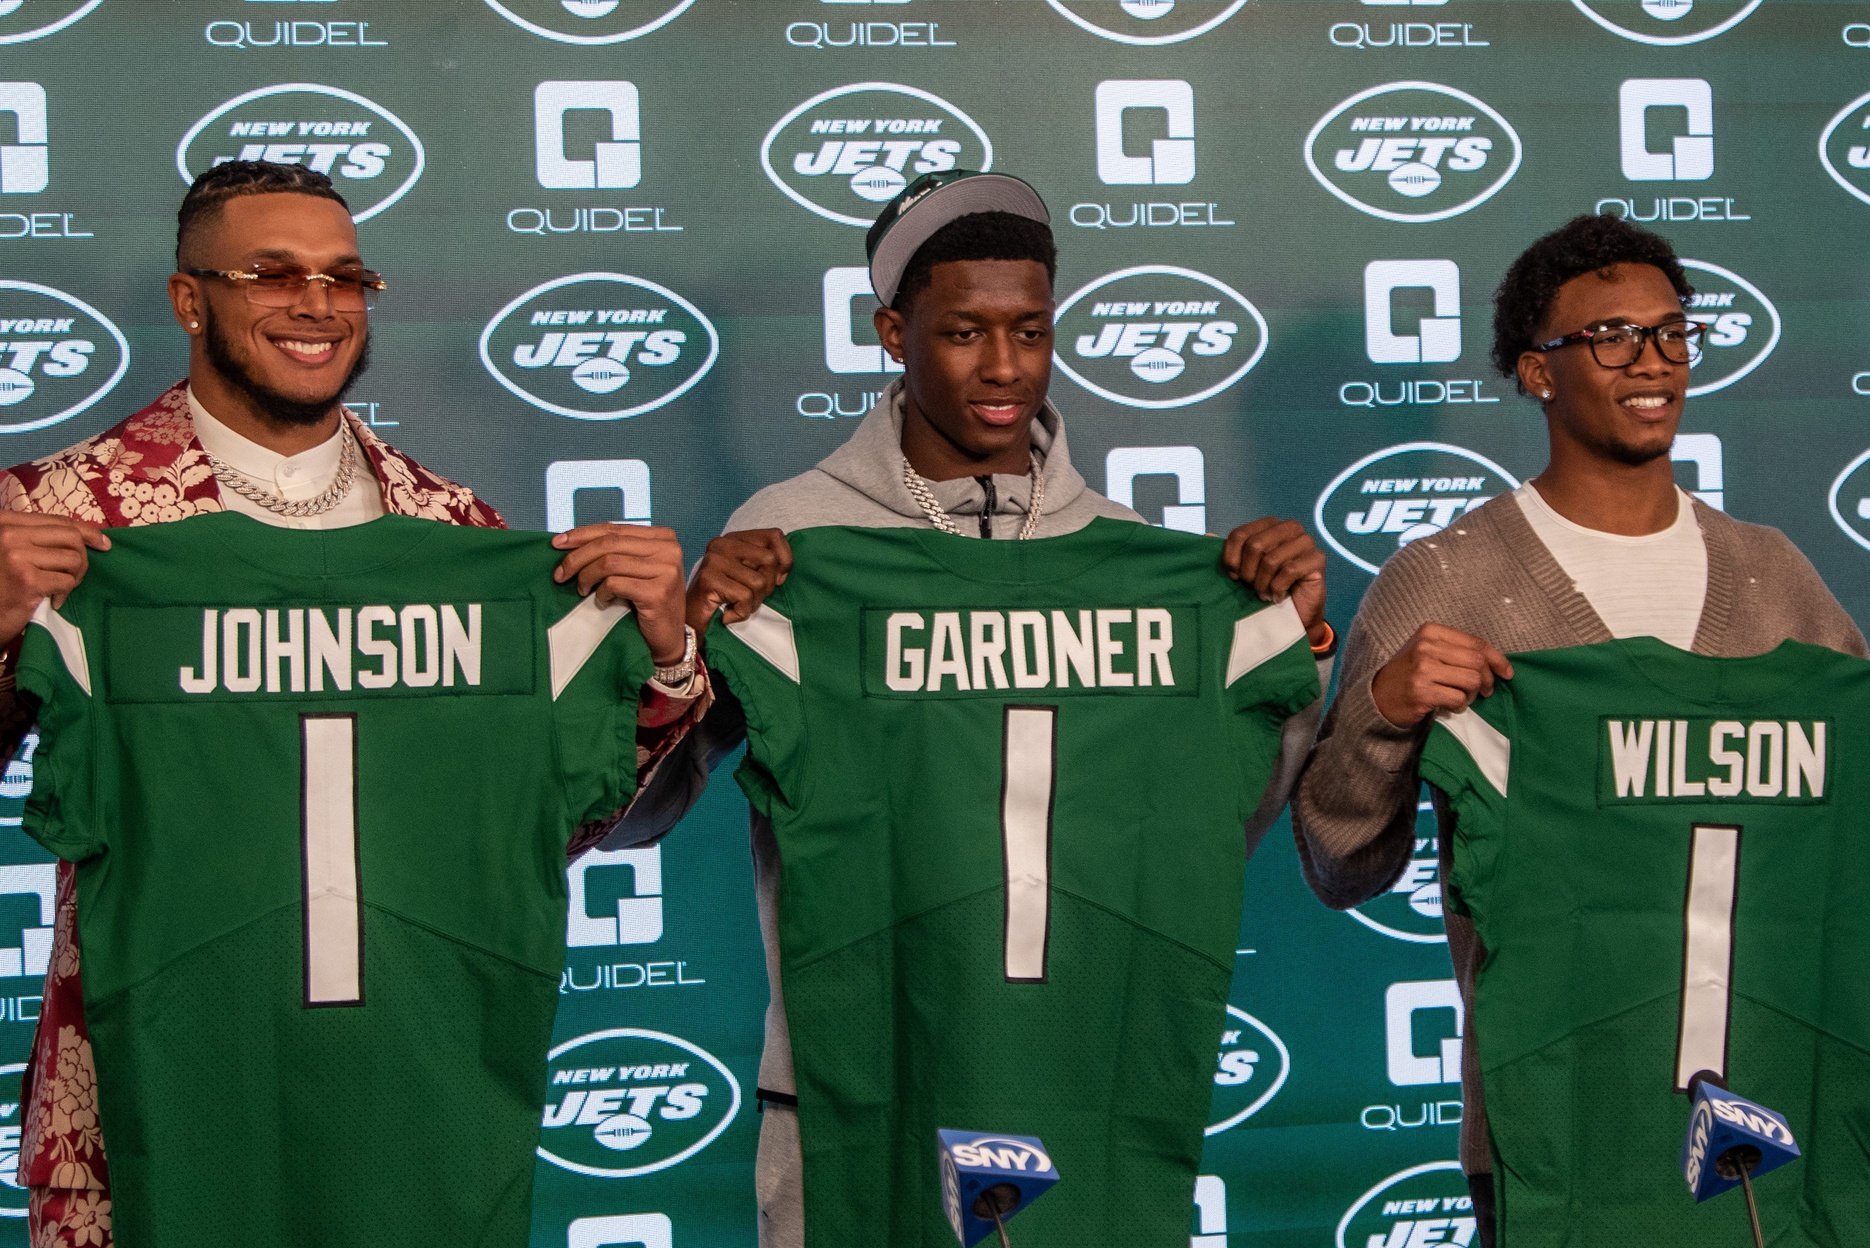 First-round picks in 2022 by the New York Jets, Jermaine Johnson (left), Sauce Gardner (middle), and Garrett Wilson (right) pose for pictures at an introductory press conference.